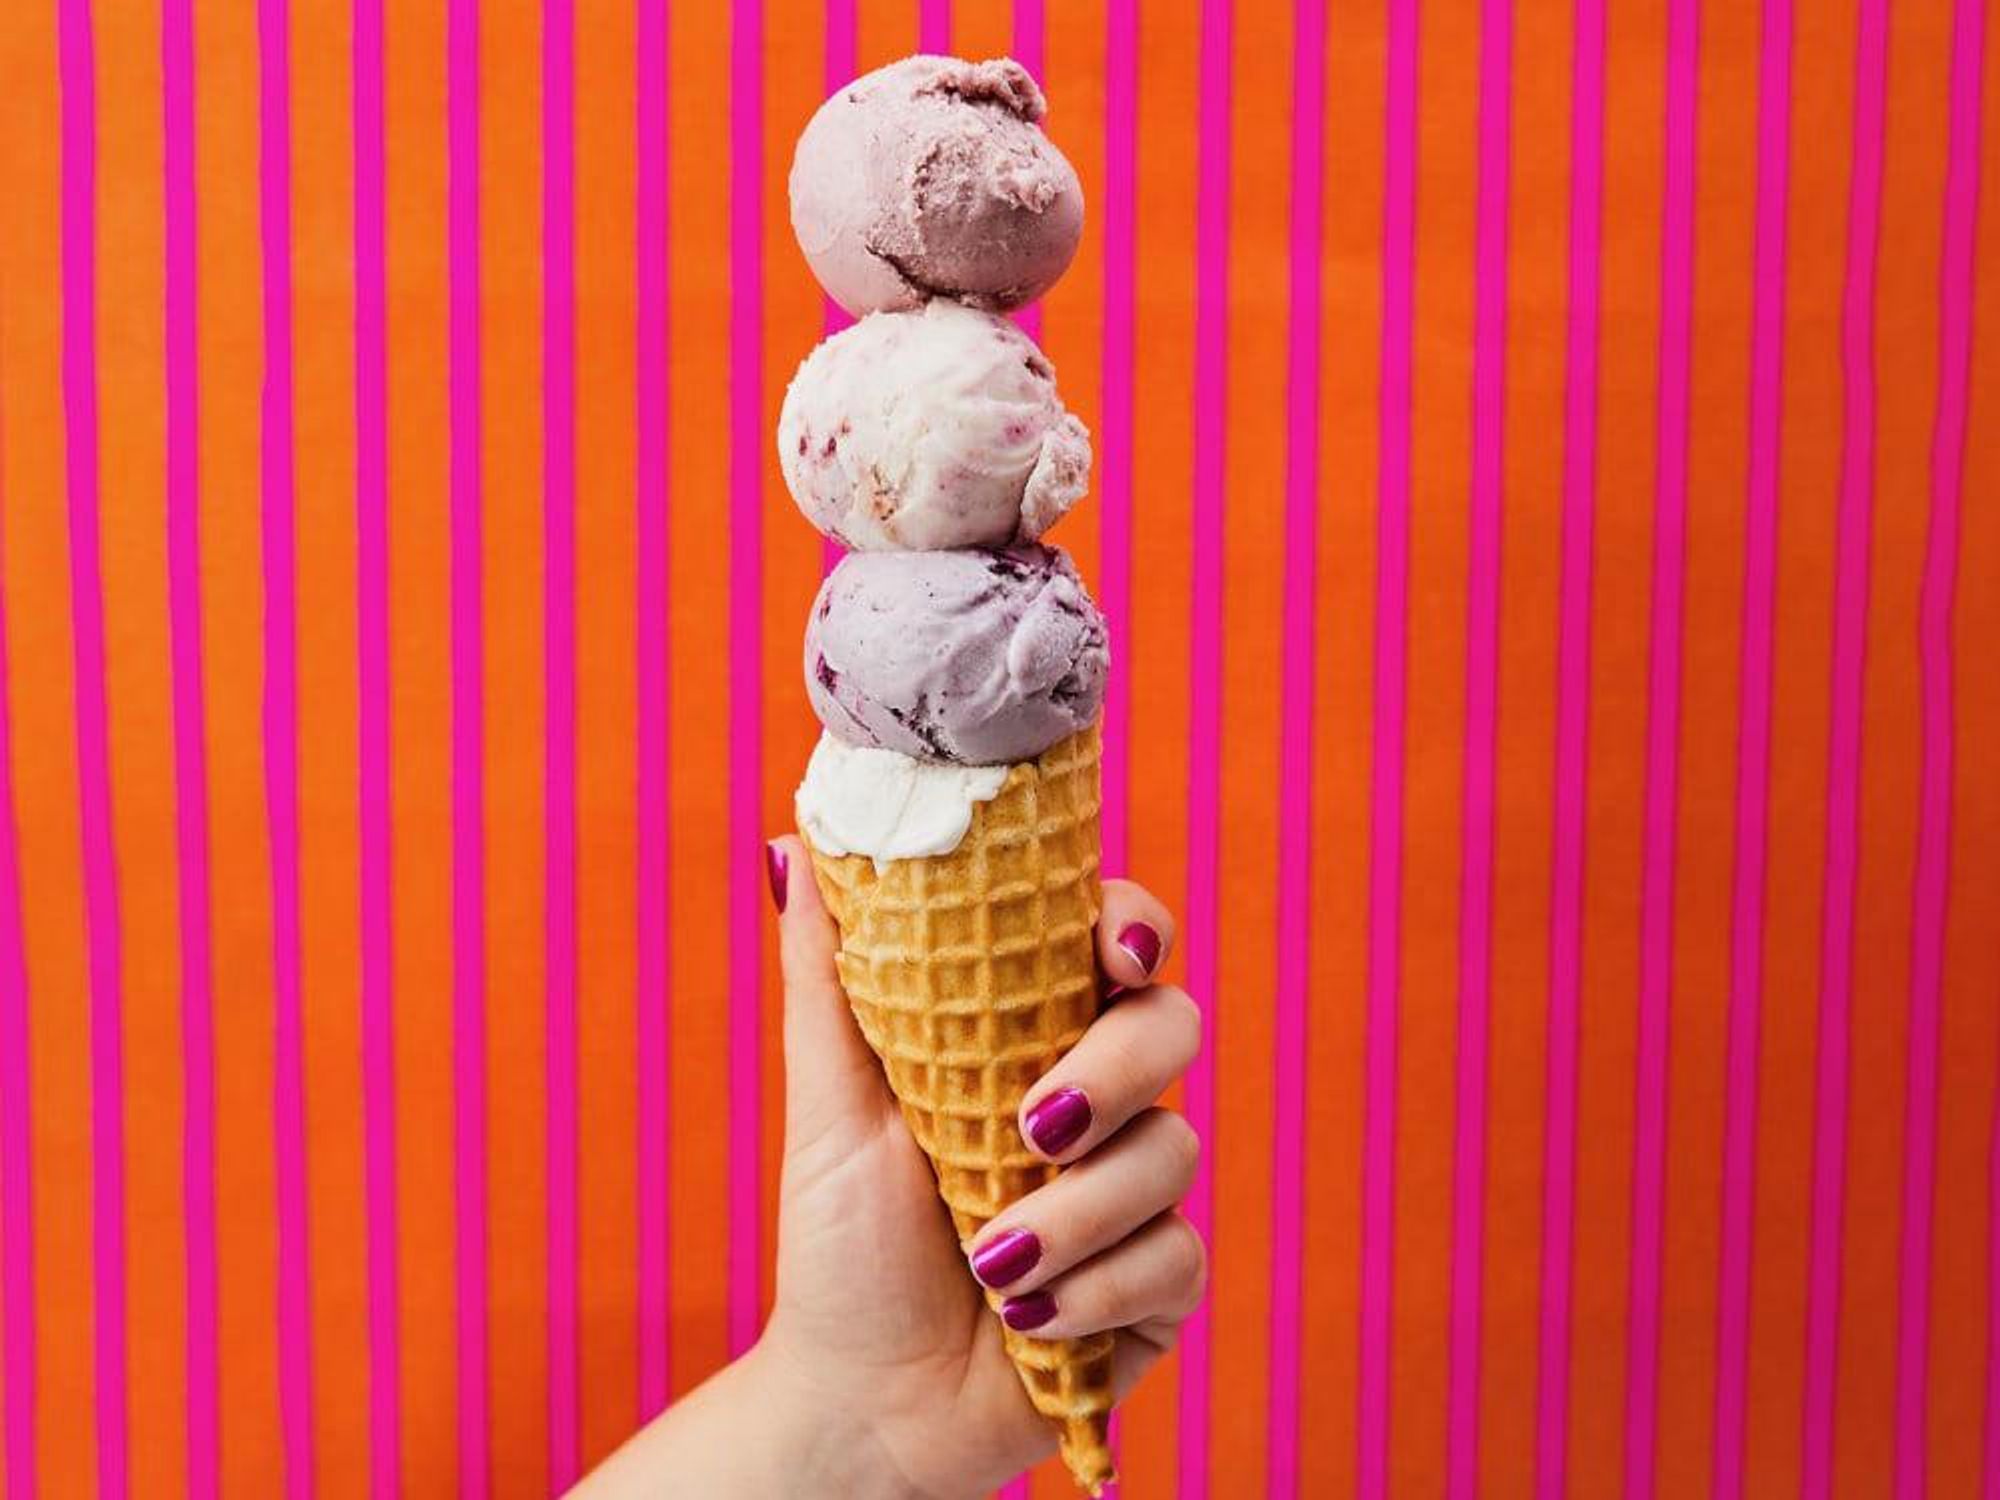 Lick Honest Ice Creams will debut in Houston this fall.